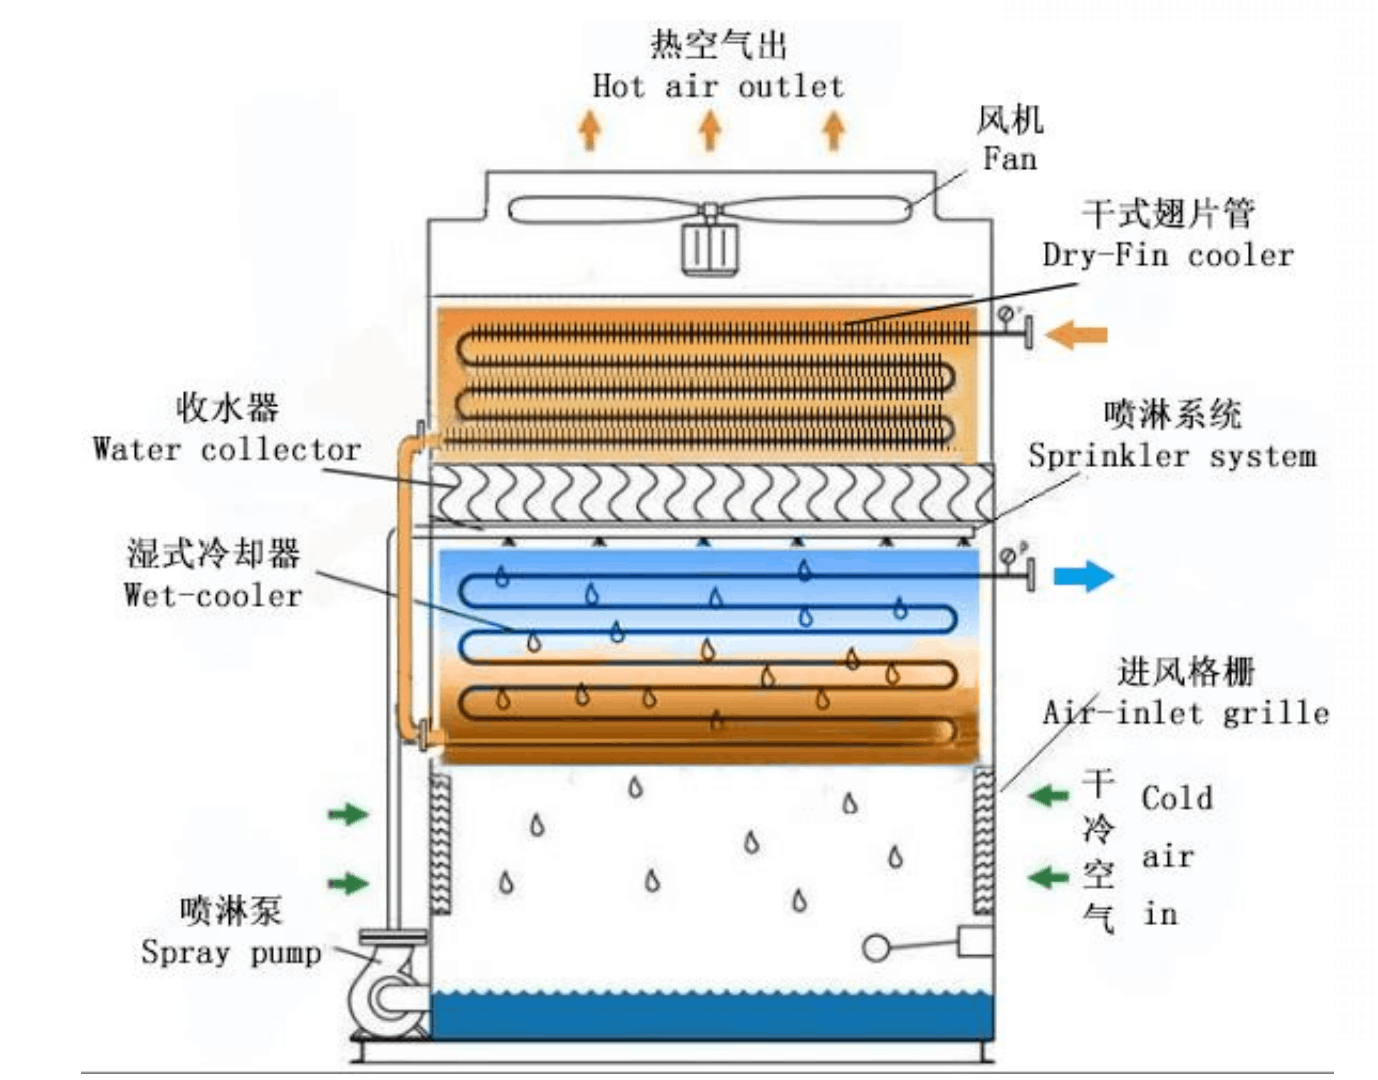 diagram of cooling unit from BITMAIN document